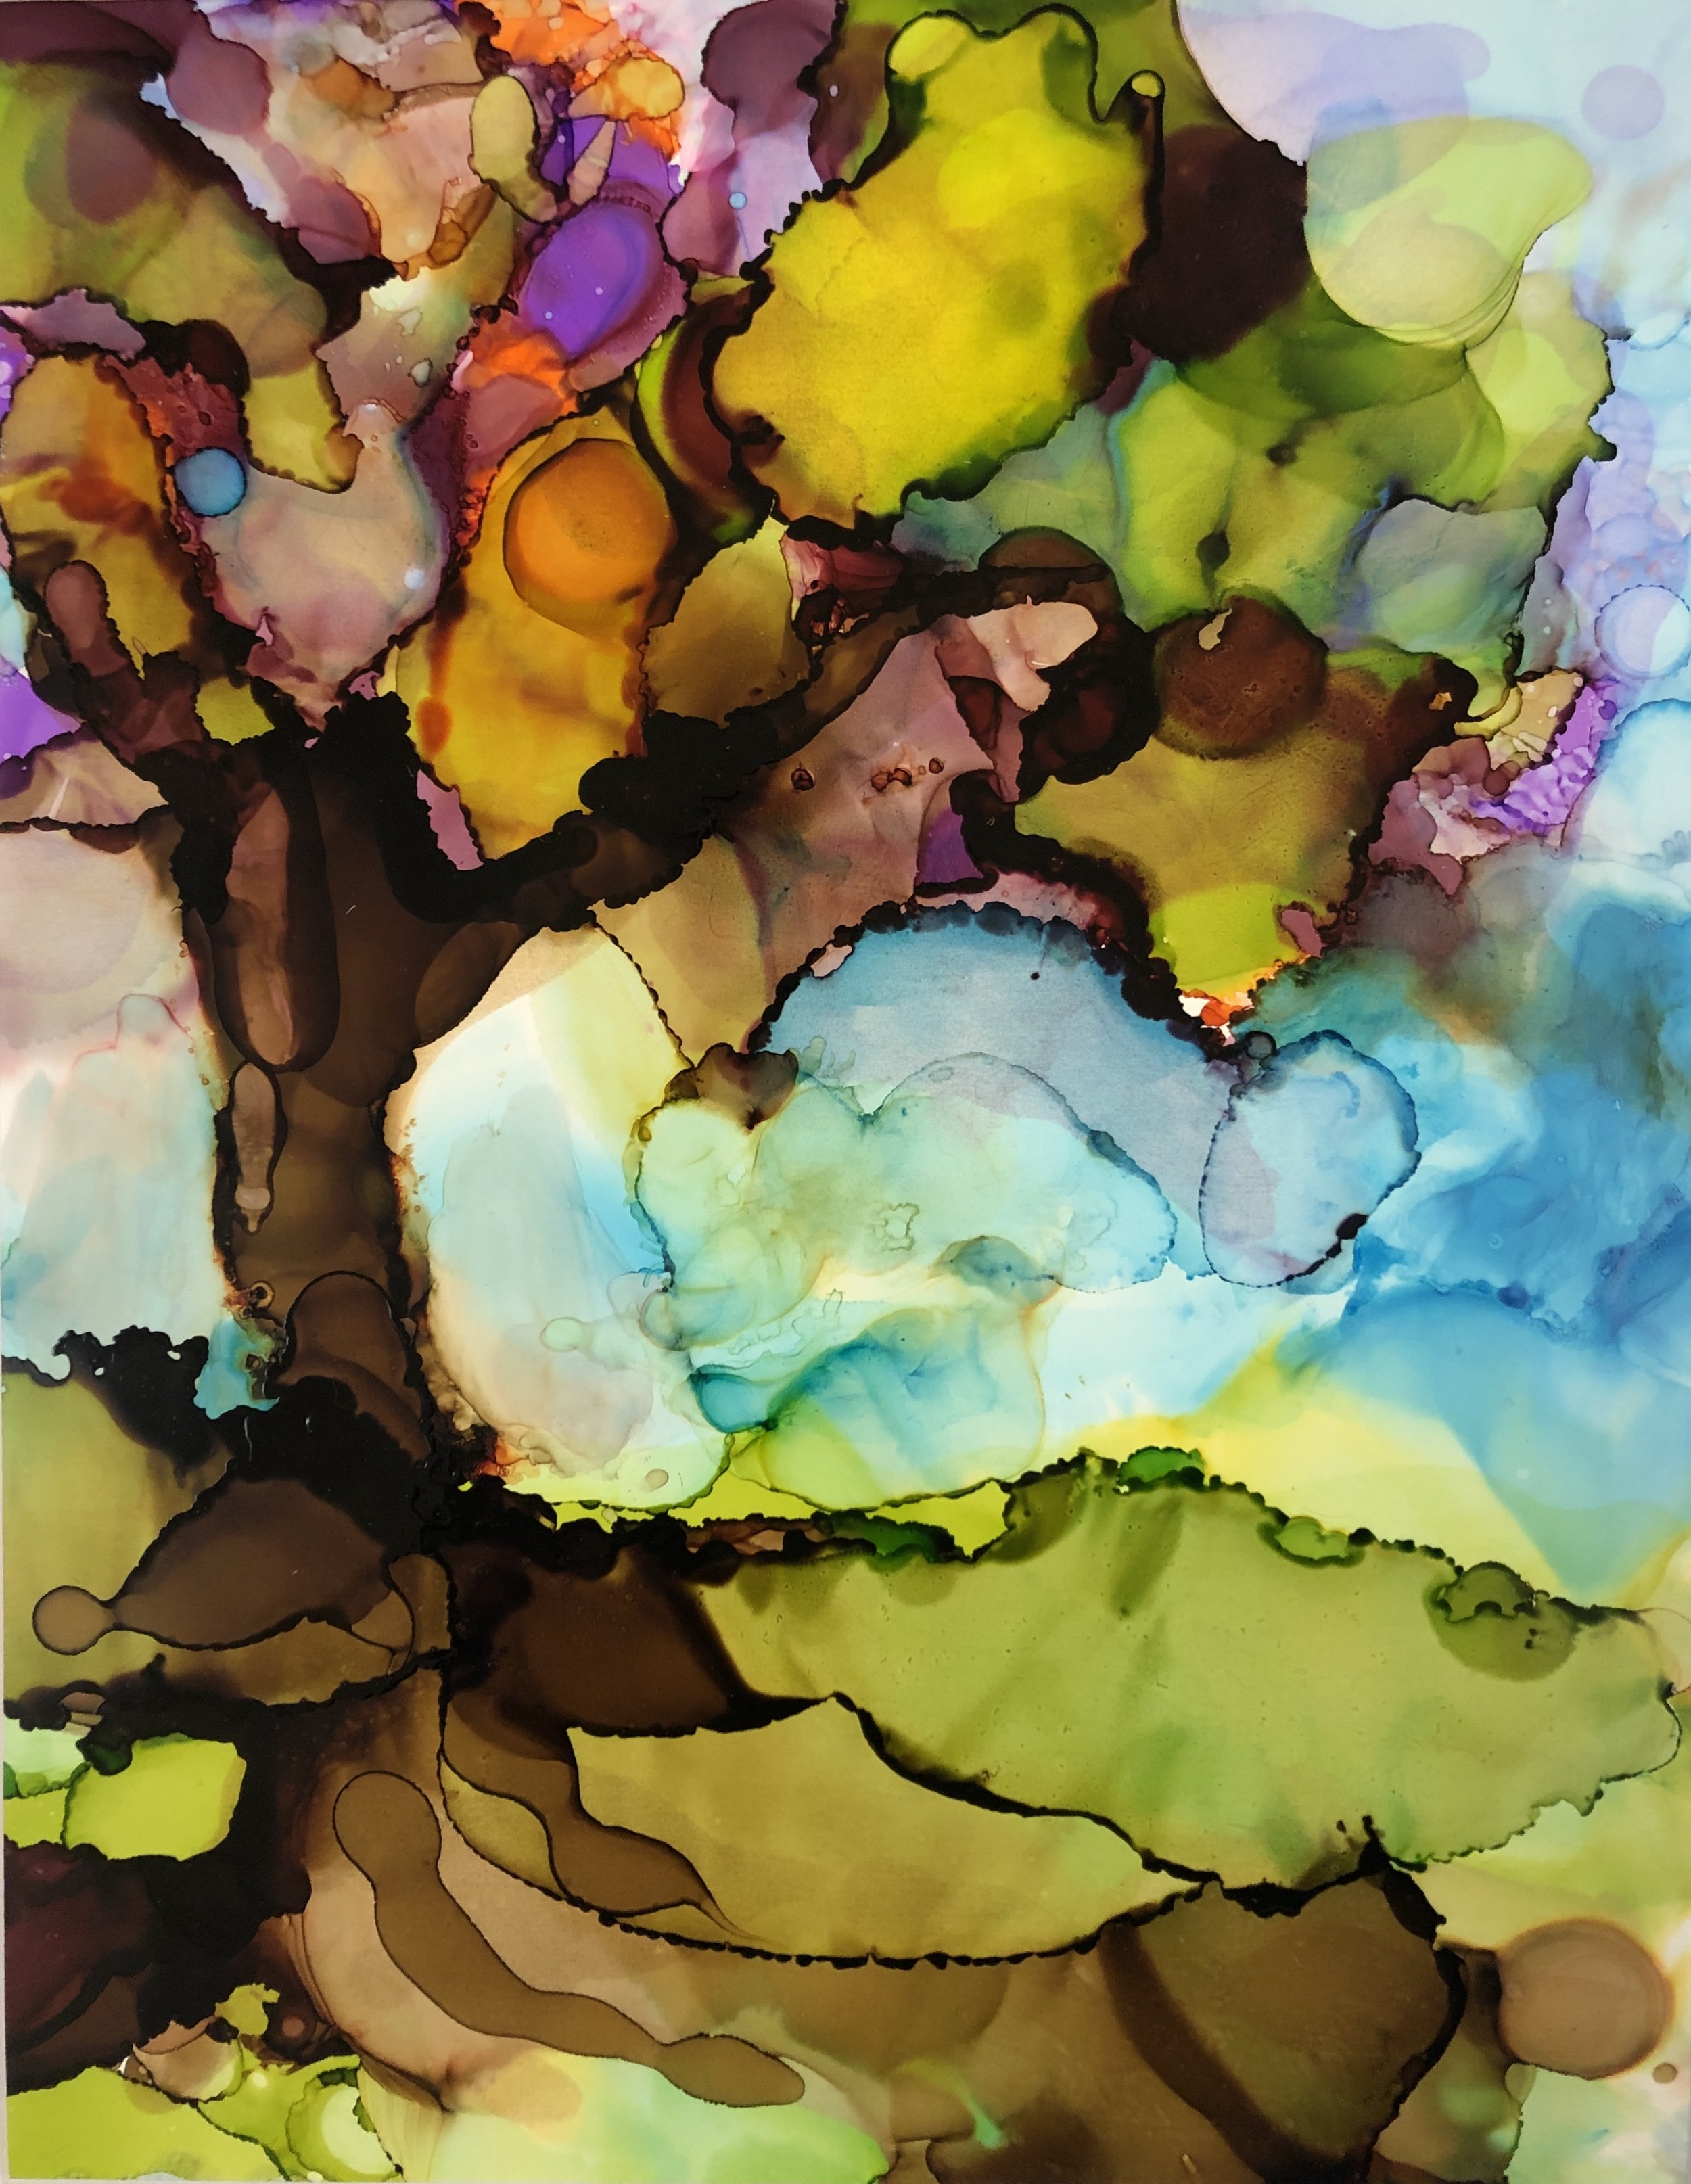 Rainbow Tree, alcohol ink on yupo paper, 14"x11" SOLD